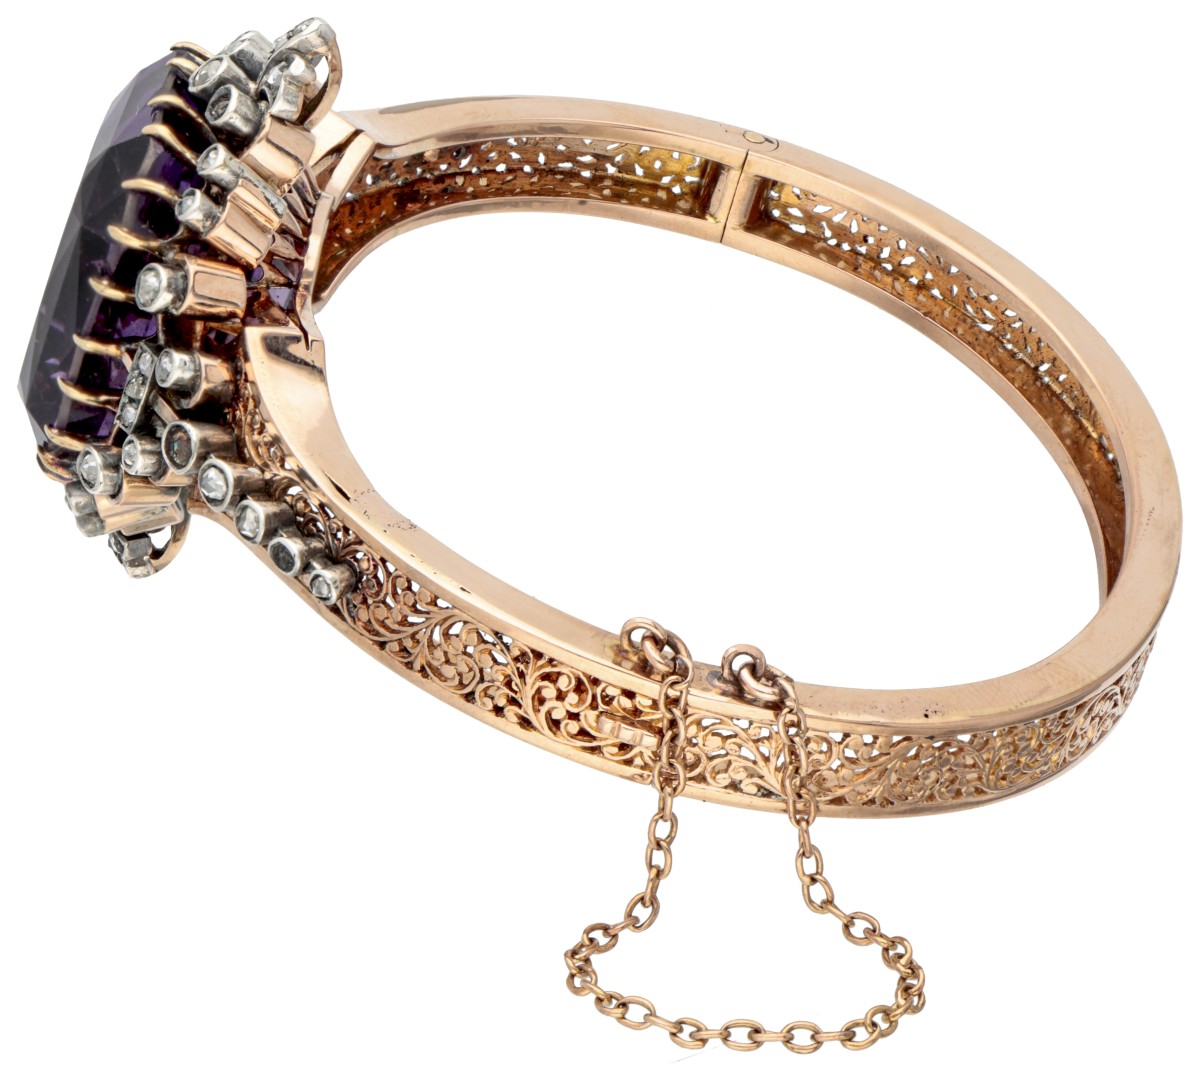 Antique 18K. rose gold French openwork bangle bracelet set with approx. 36.19 ct. amethyst and diamo - Image 3 of 5